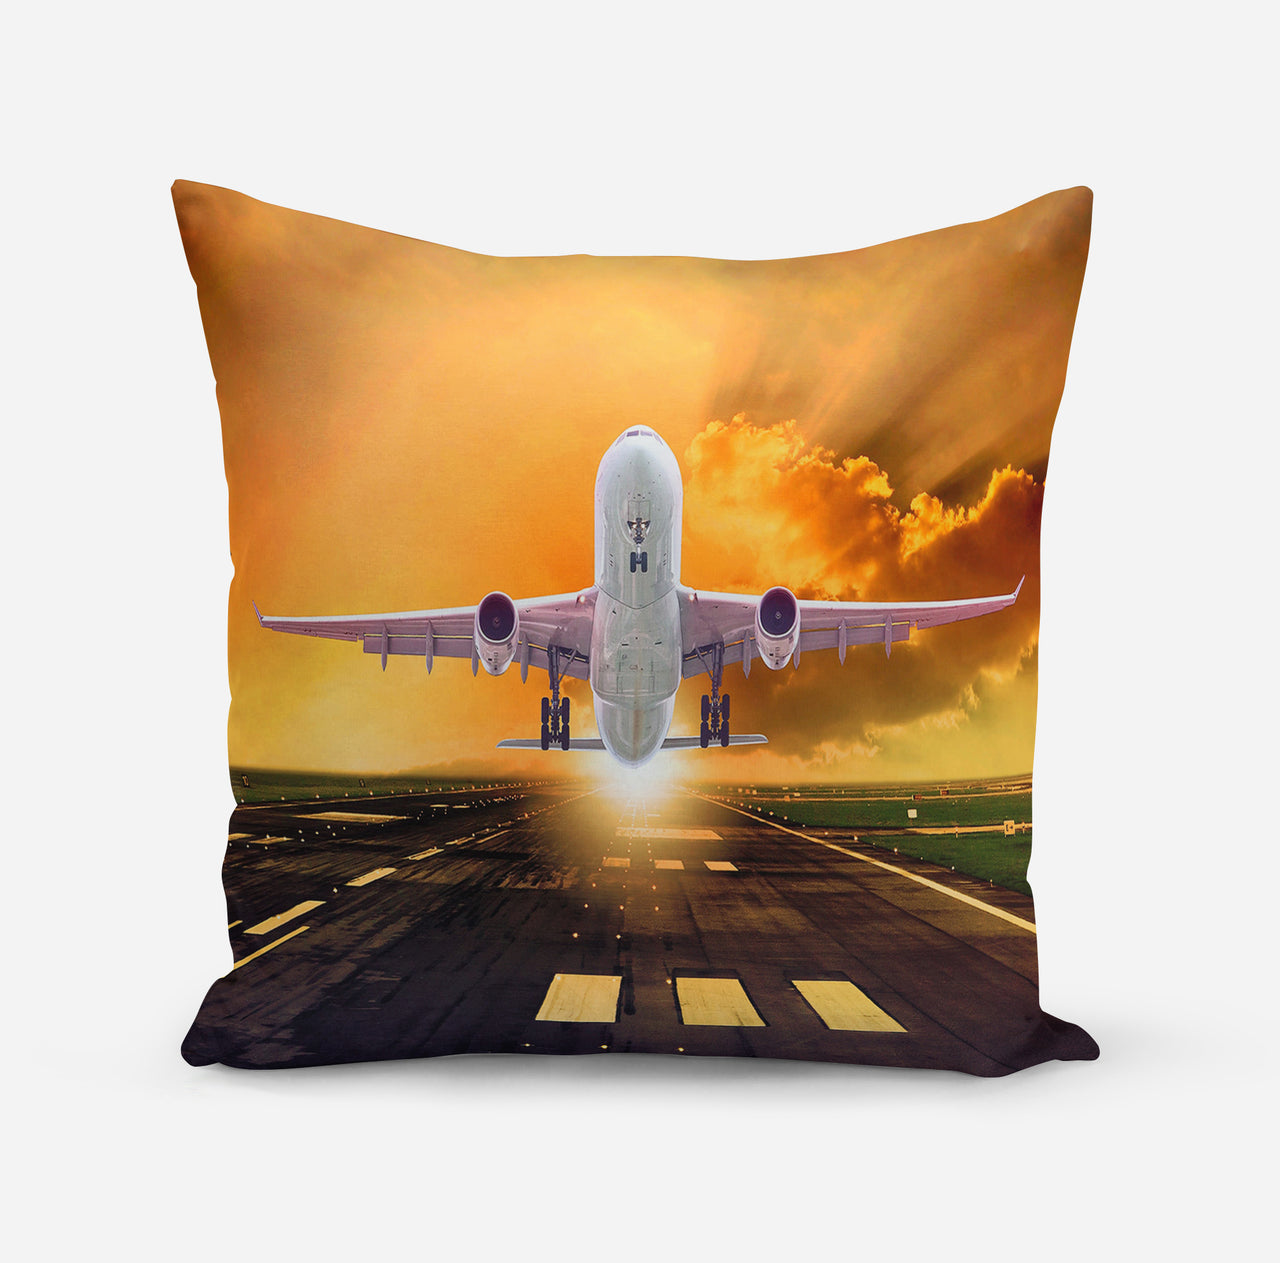 Amazing Departing Aircraft Sunset & Clouds Behind Designed Pillows